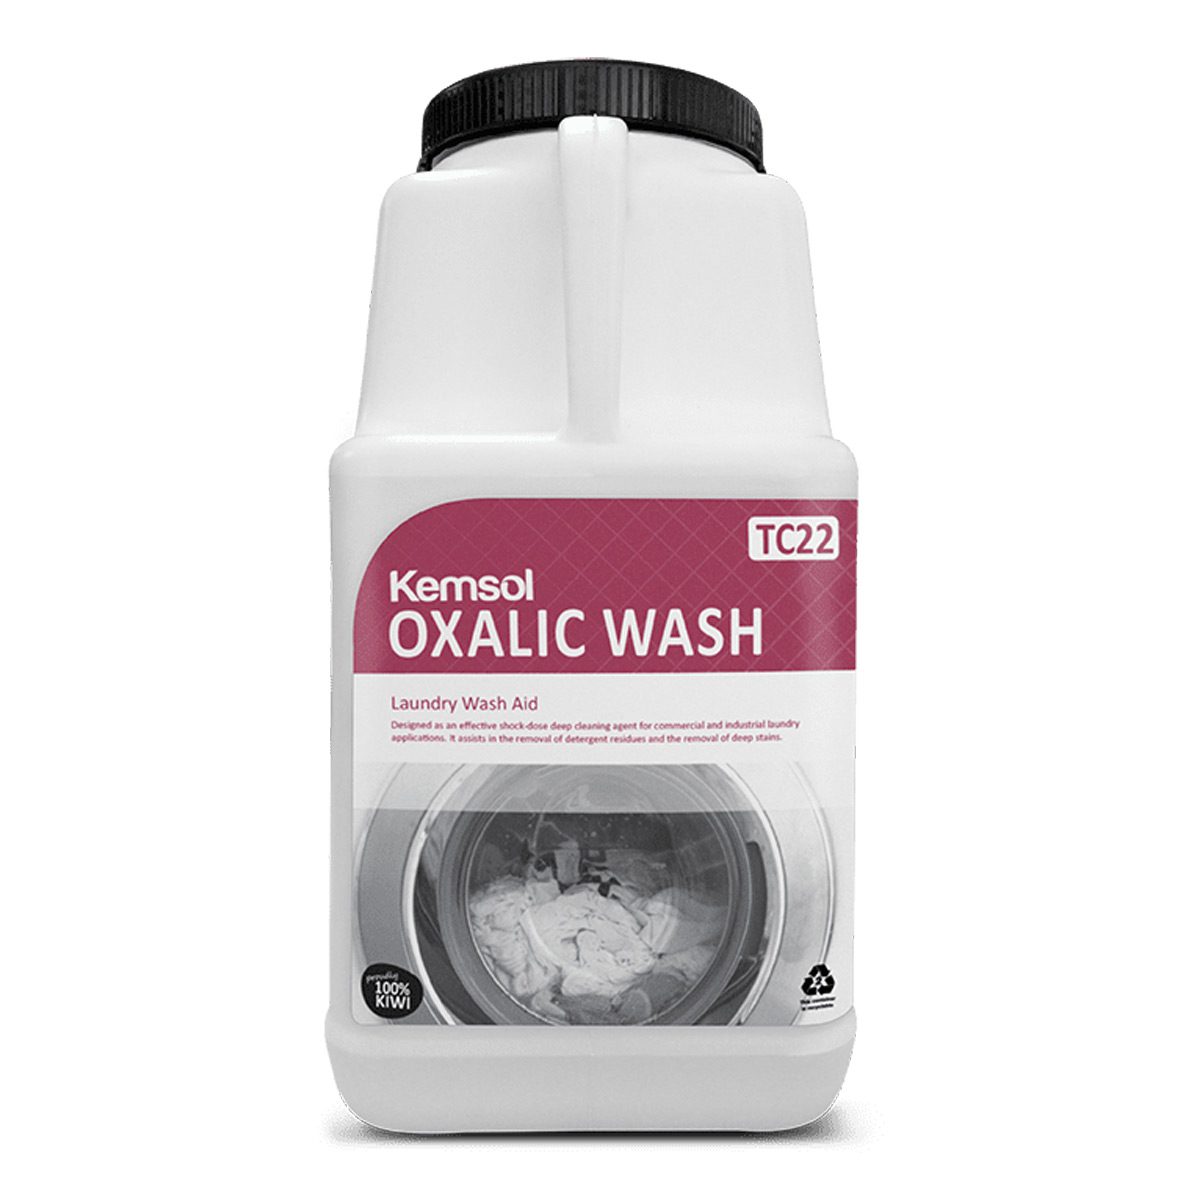 cleaning-products-laundry-kemsol-oxalic-wash-5kg-effective-shock-dose-deep-cleaning-commercial-industrial-laundry-removal-detergent-residues-removal-deep-stains-vjs-distributors-KOXALIC